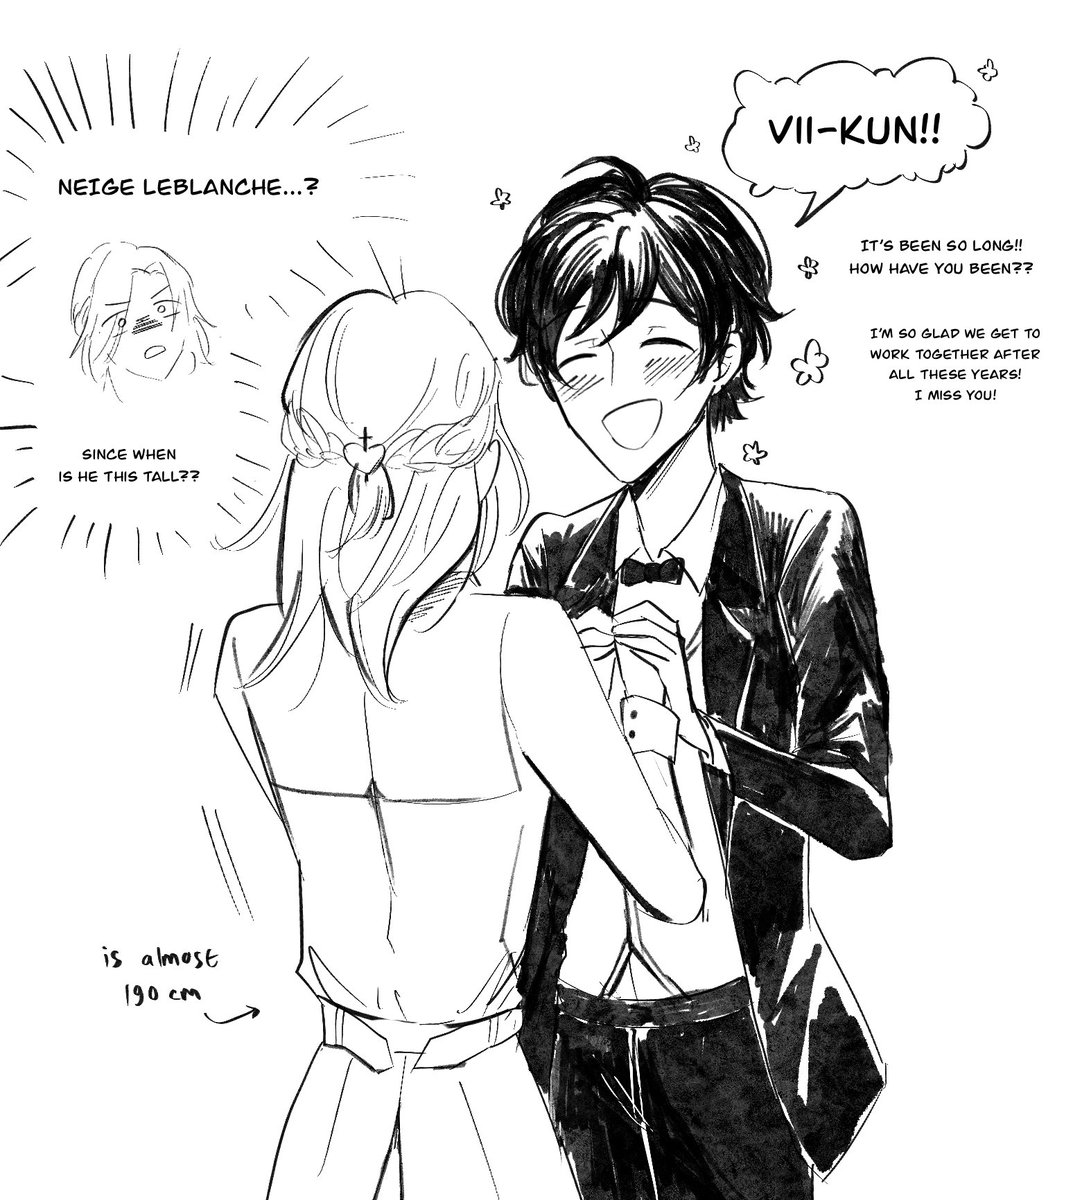 in which vil schoenheit lost his only advantage left.... his height
[ ネジュヴィル /  neigevil ] 